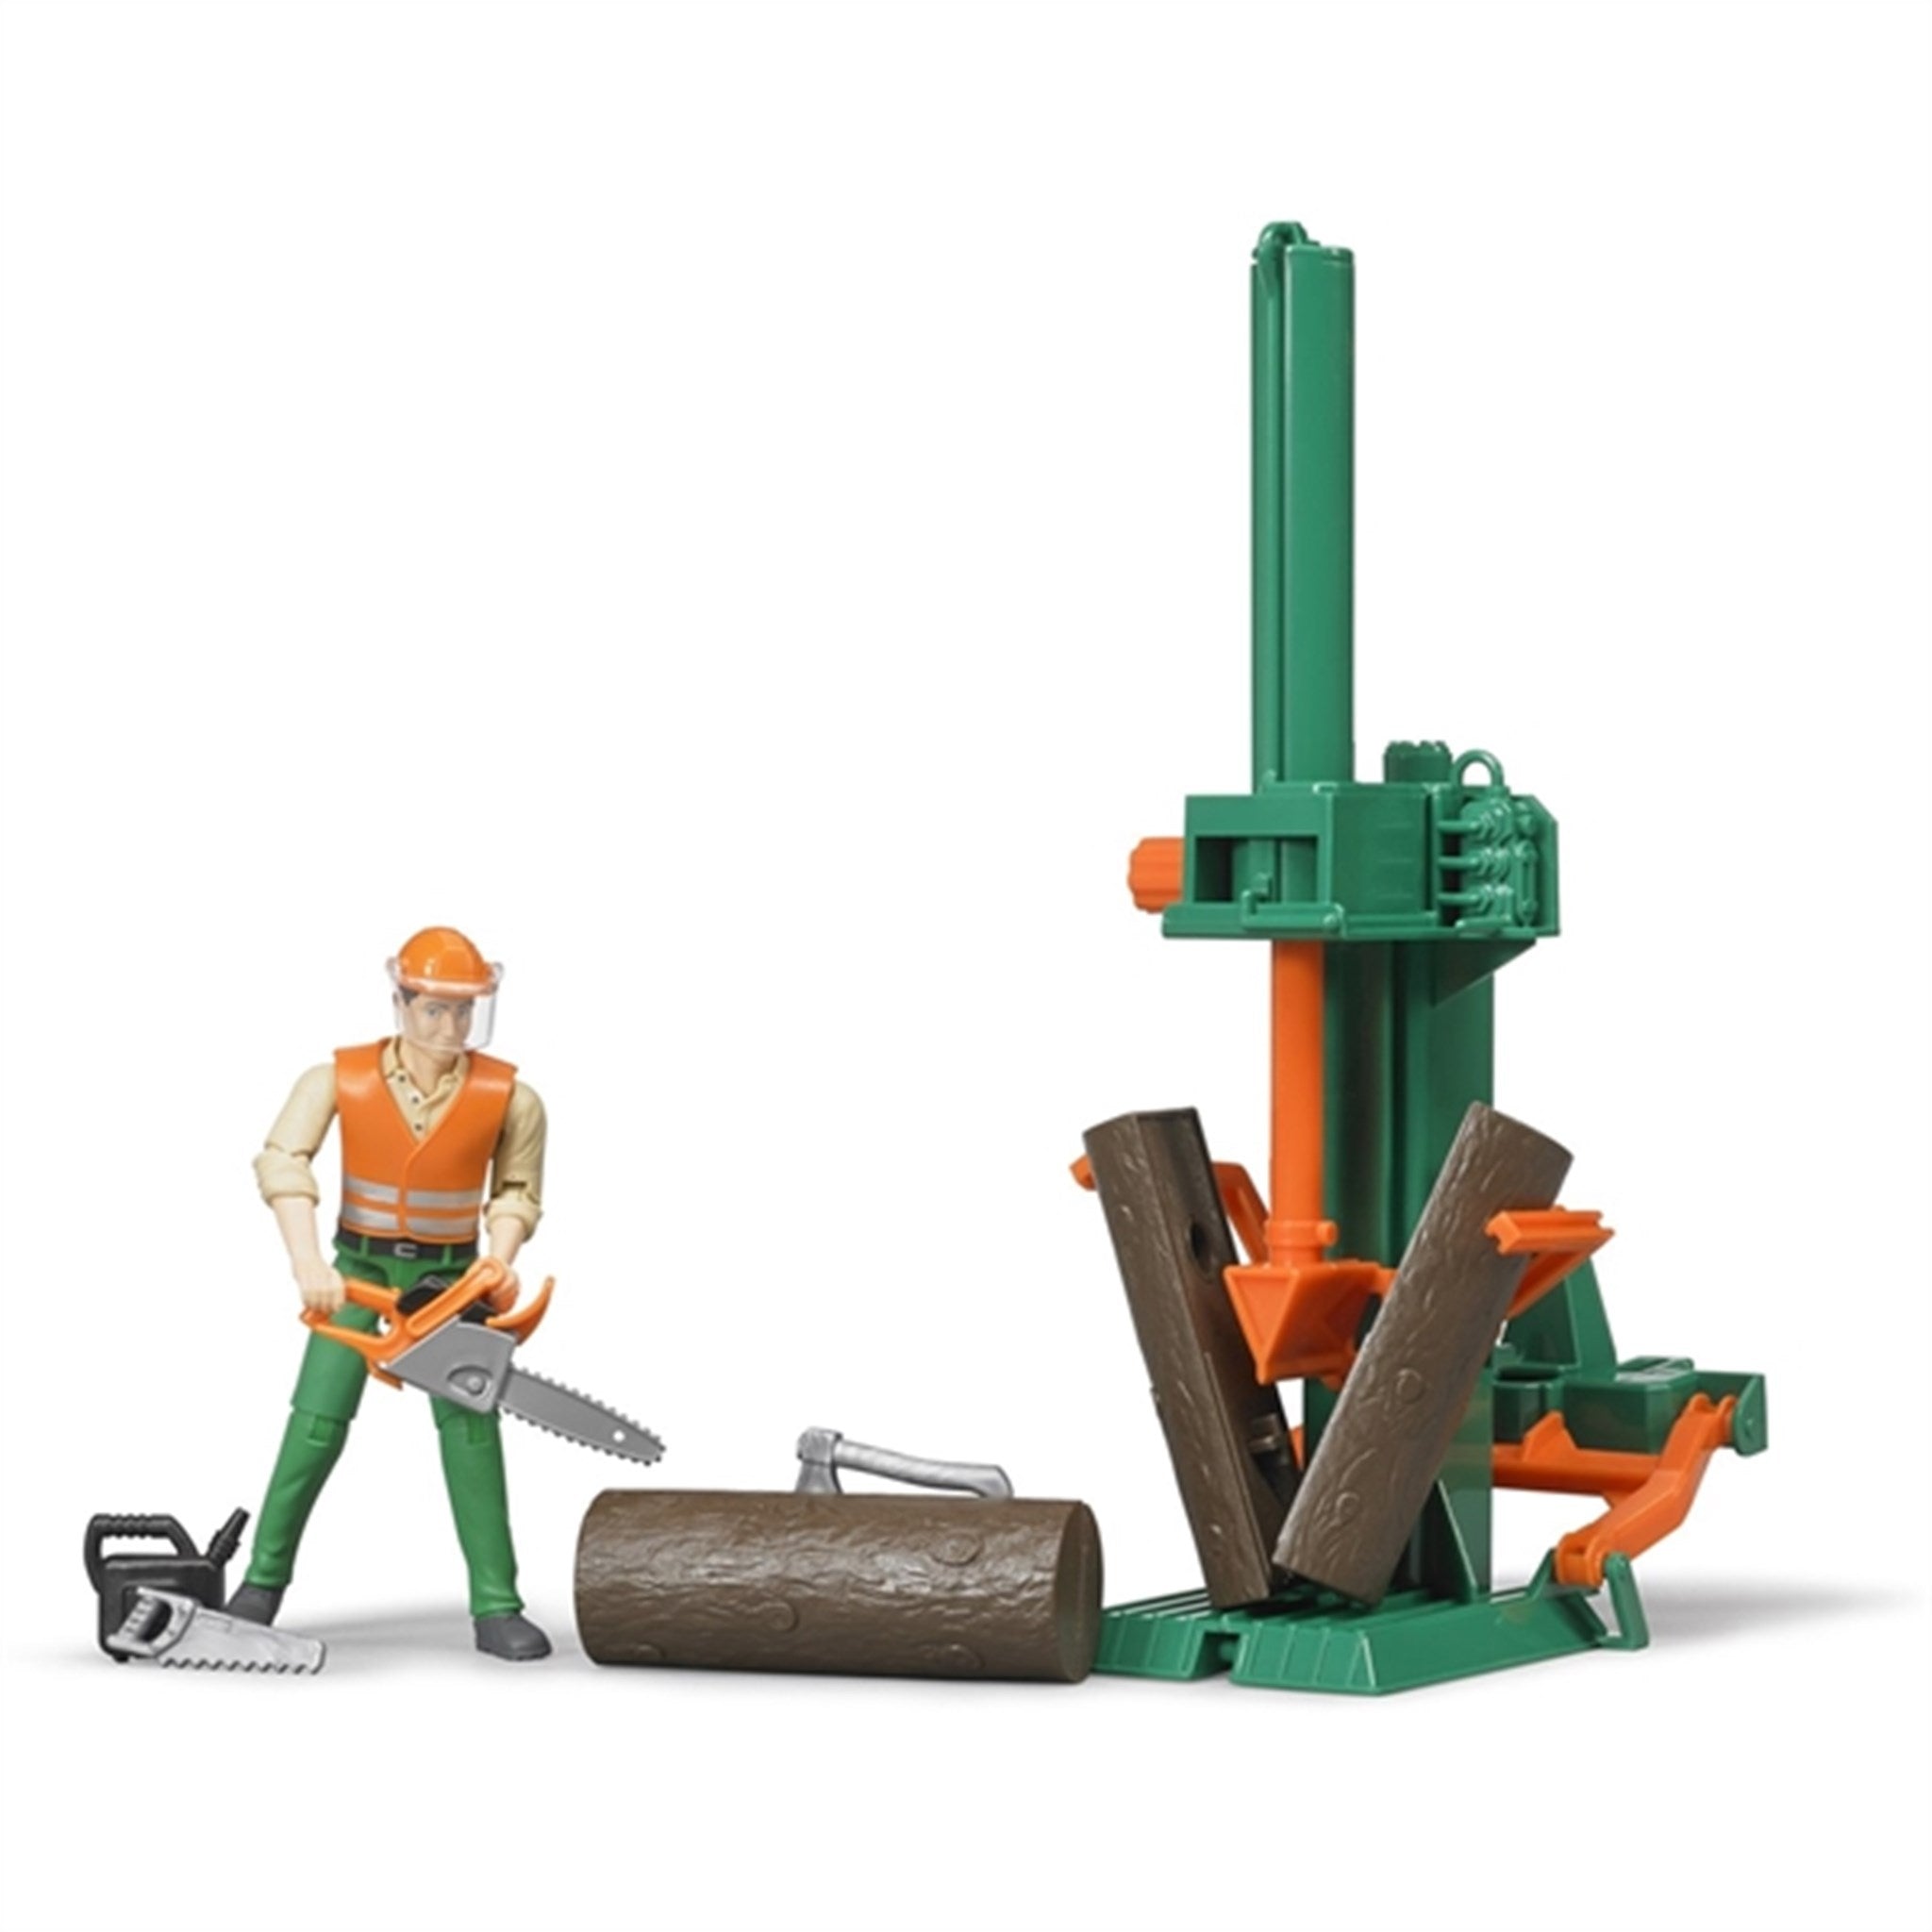 Bruder Figure-Set Forestry with Accessories 2